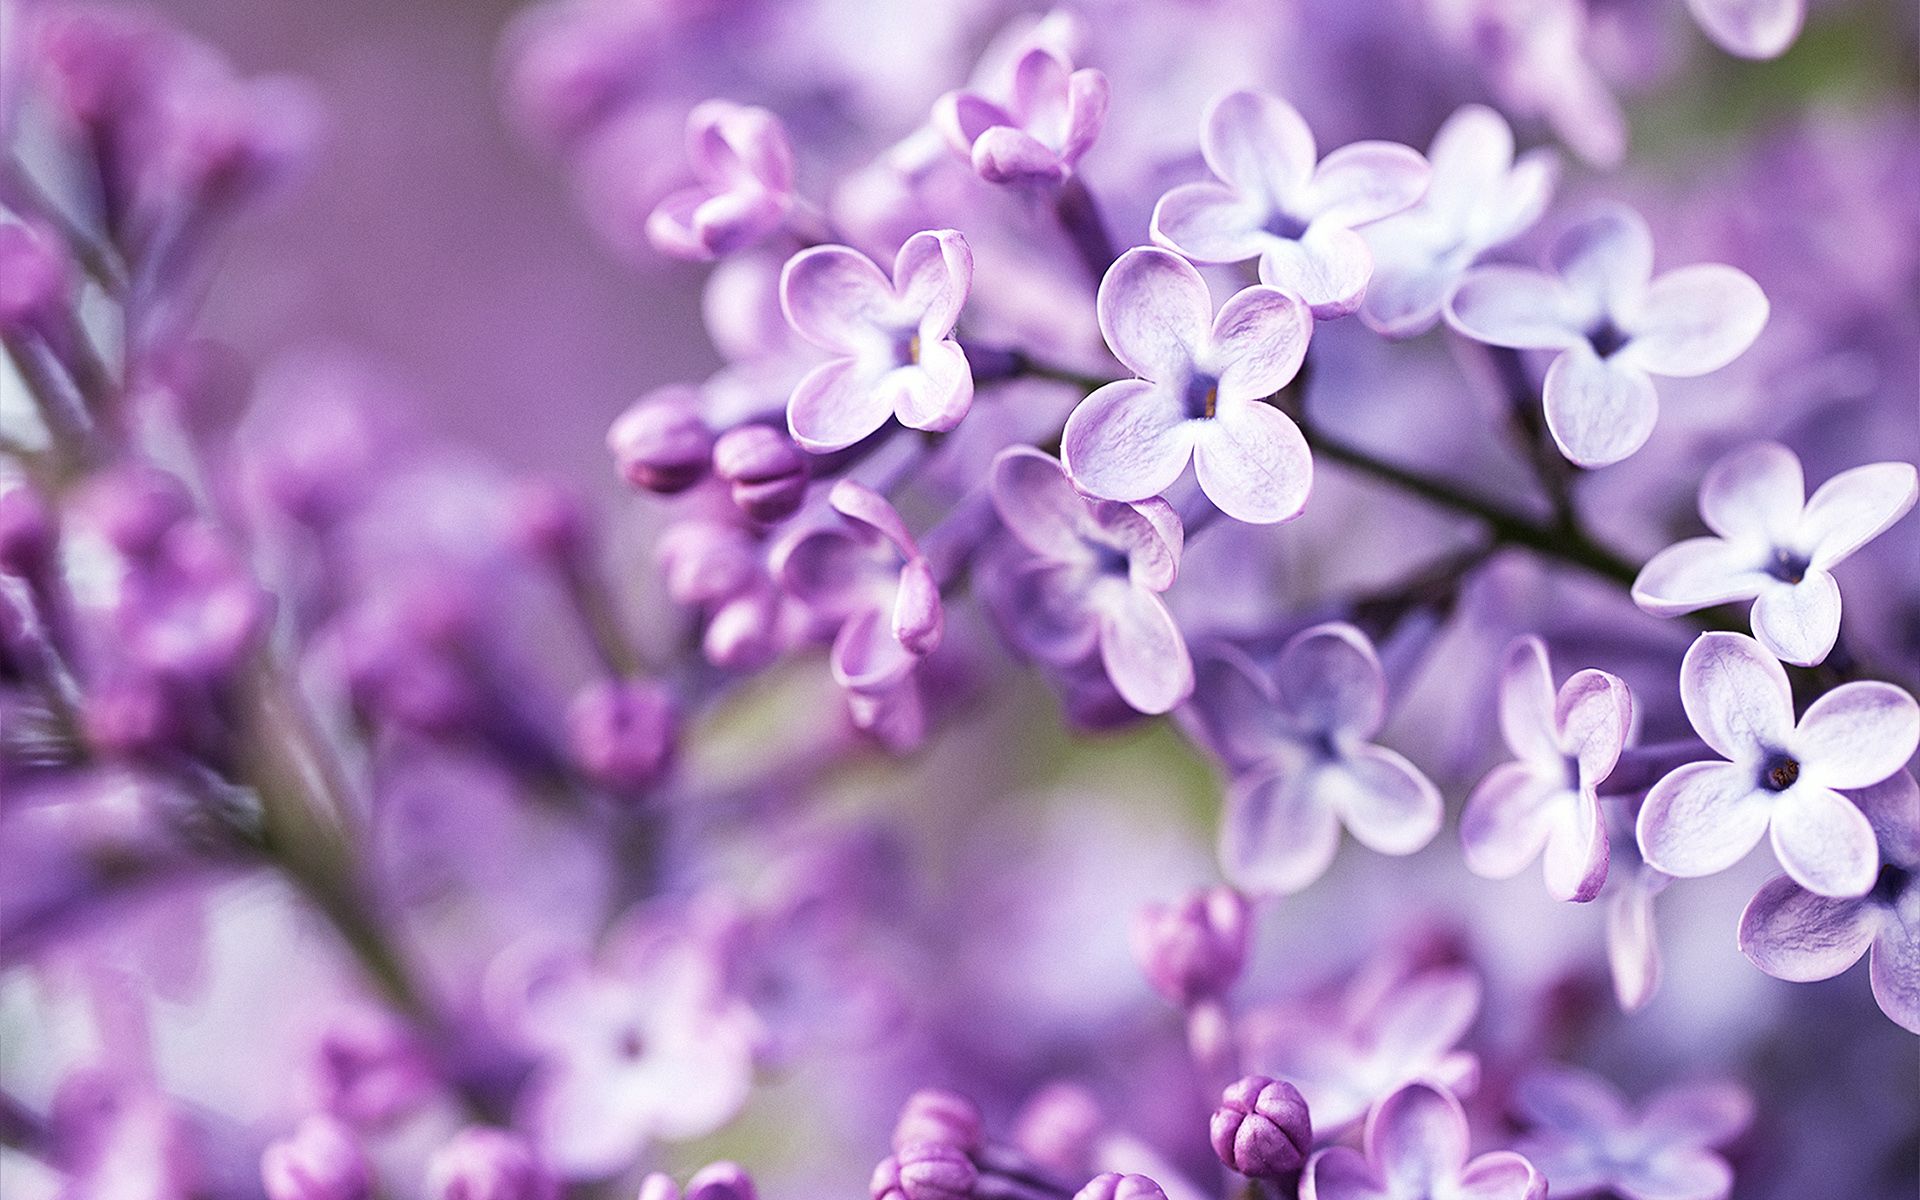 purple flowers images and wallpapers Download